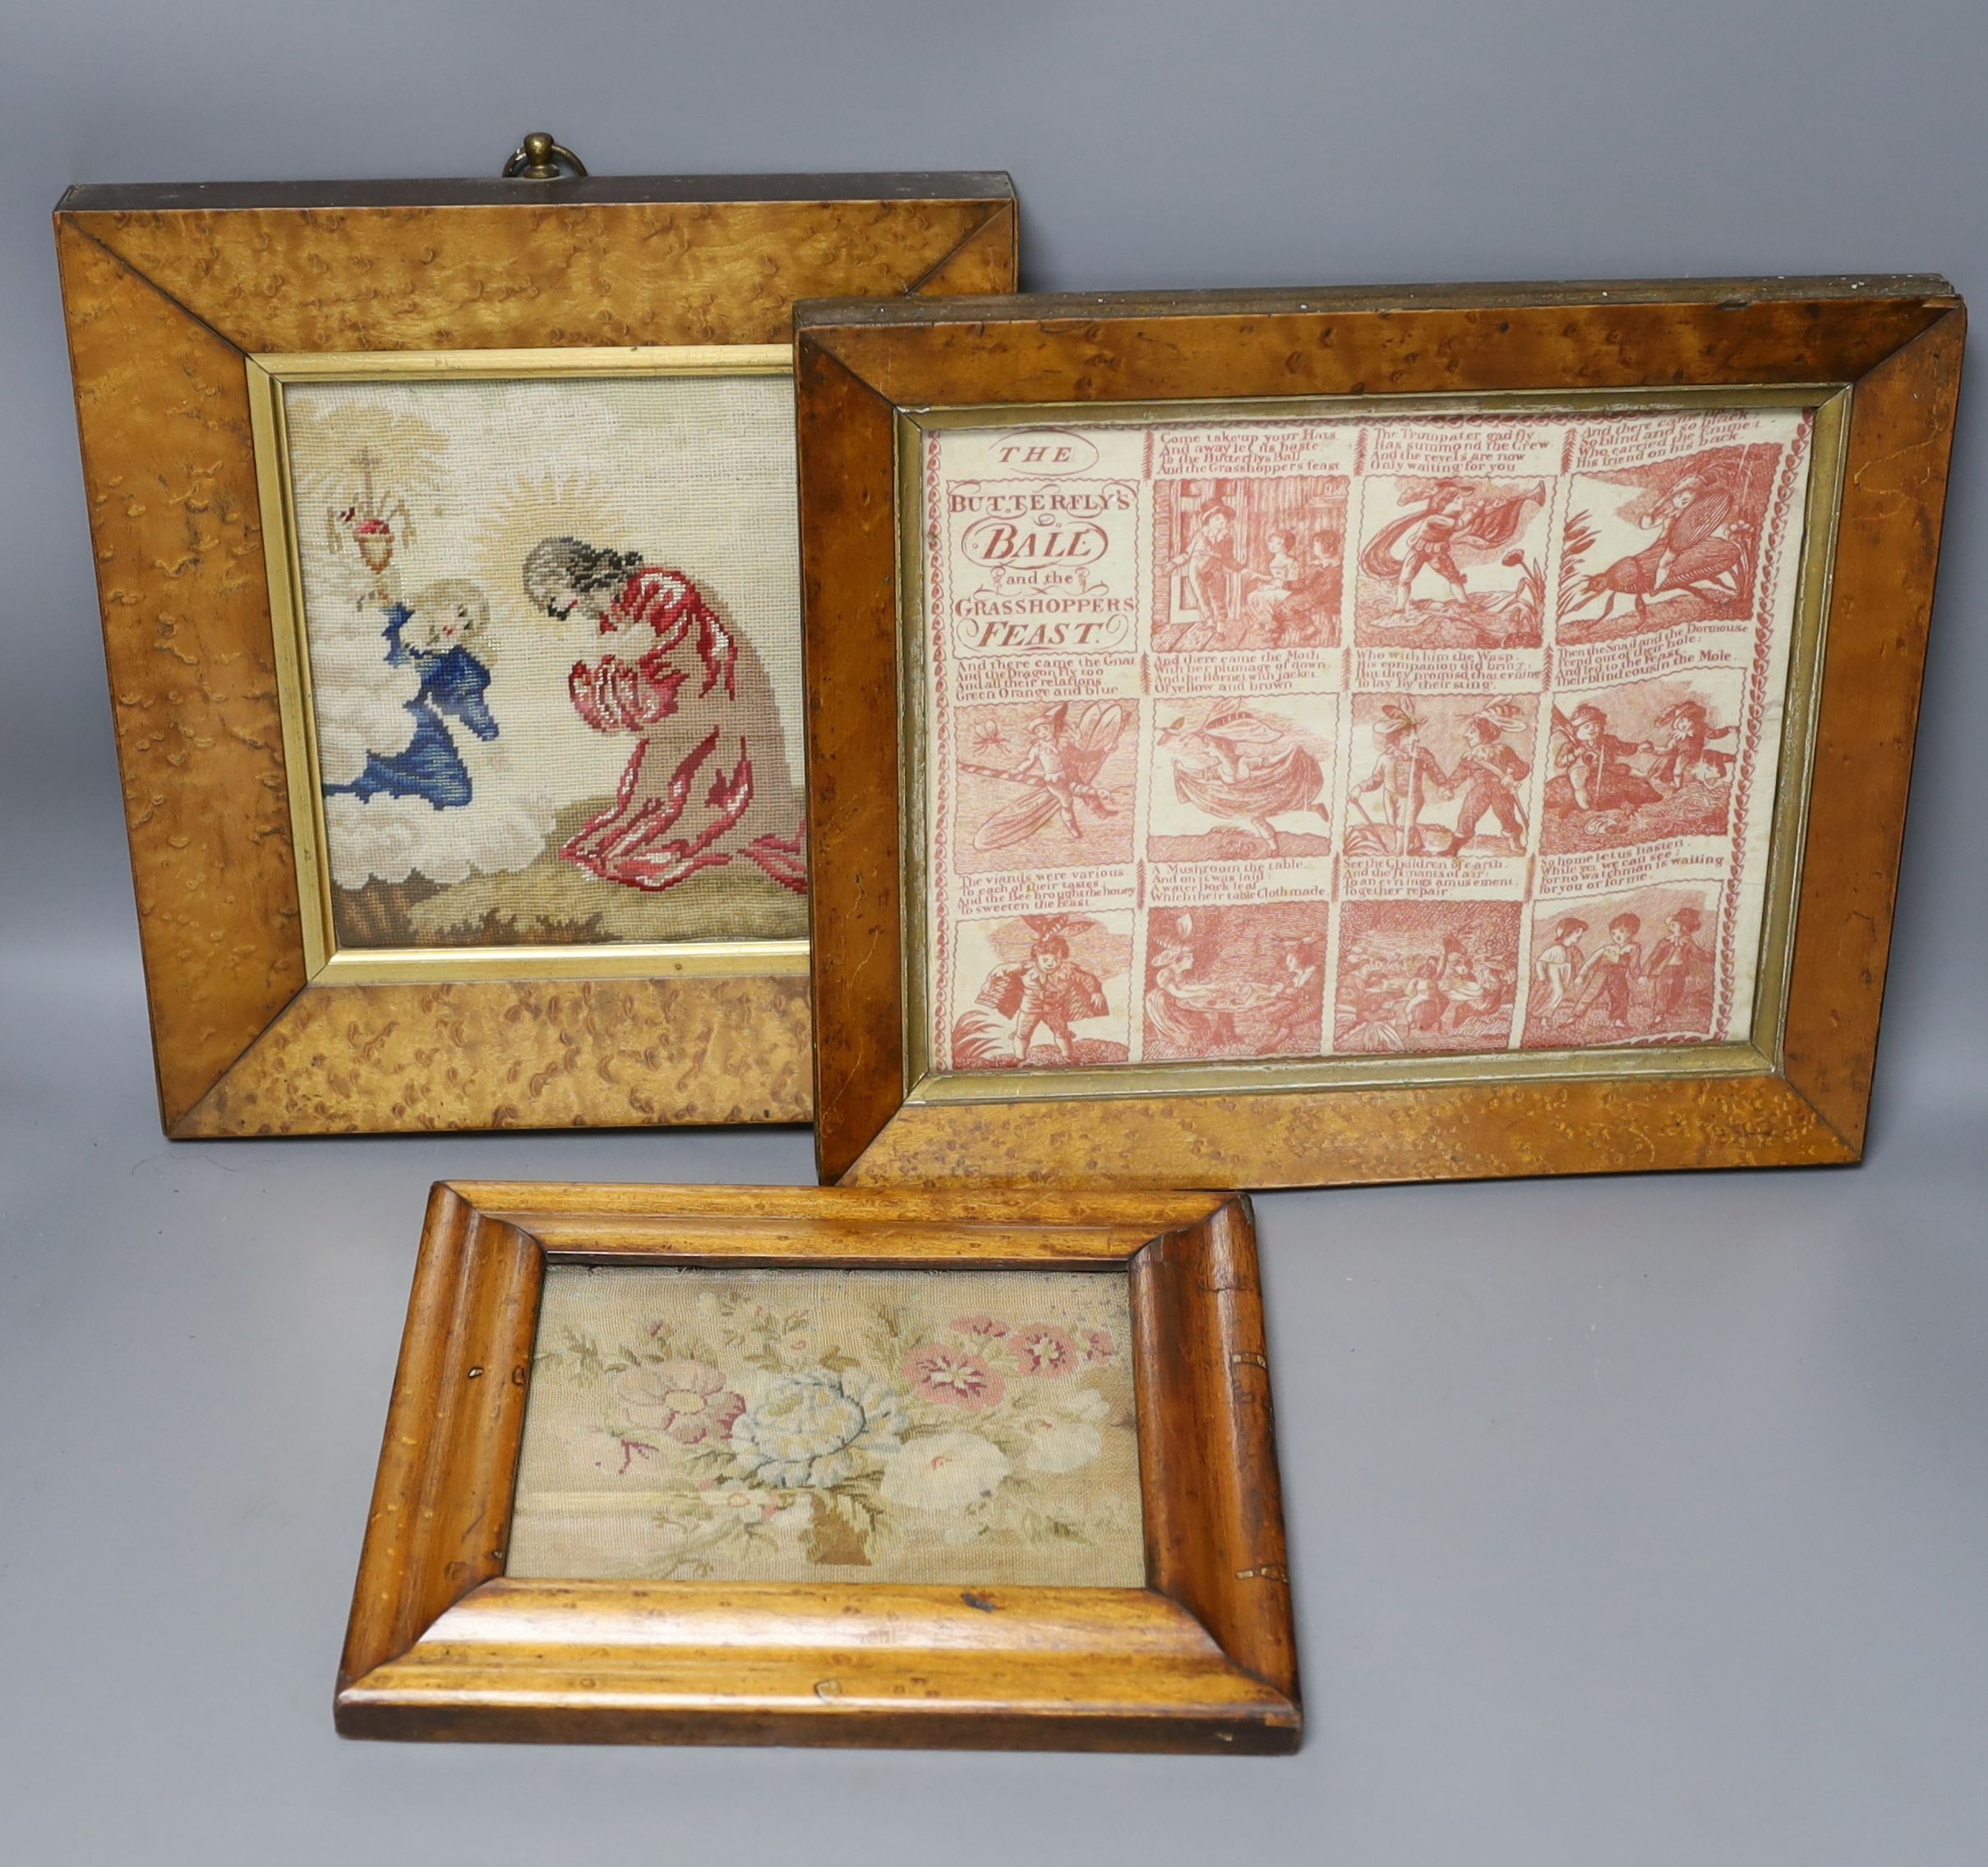 A Victorian 'The Butterfly's Ball and the Grasshopper's Feast' printed handkerchief and two needlepoints, all in maple frames.